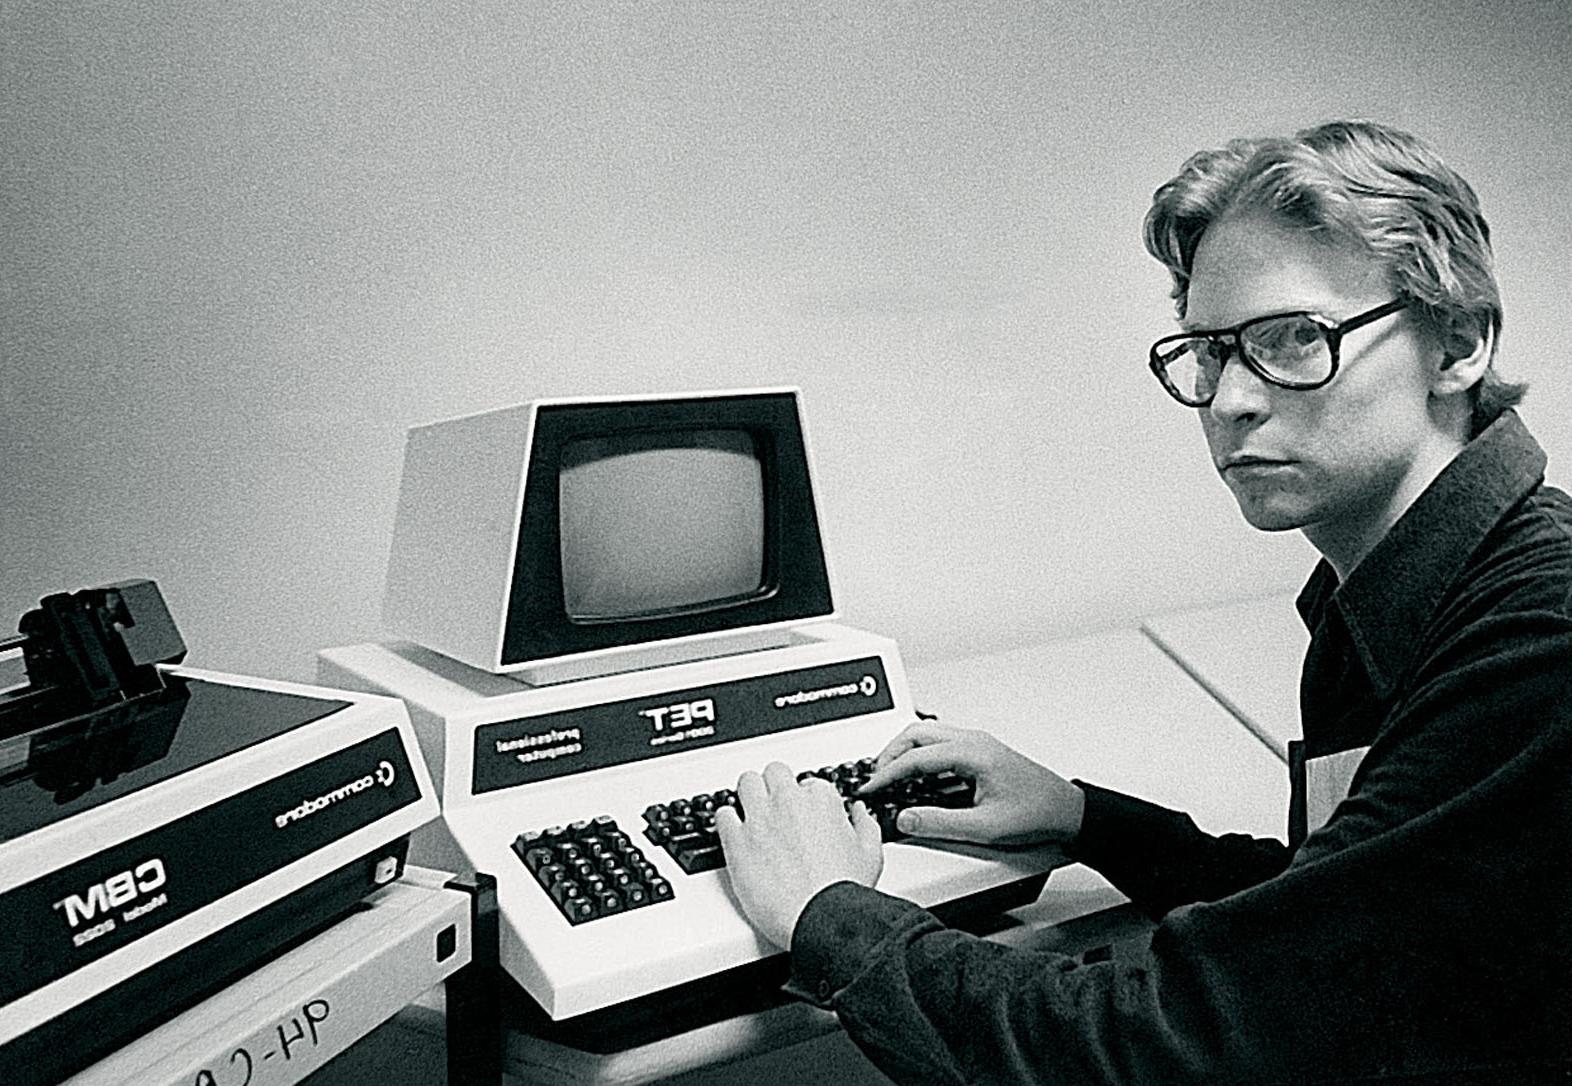 Northwest's computer science department purchased Commodore PETs for teacher education in 1977. 